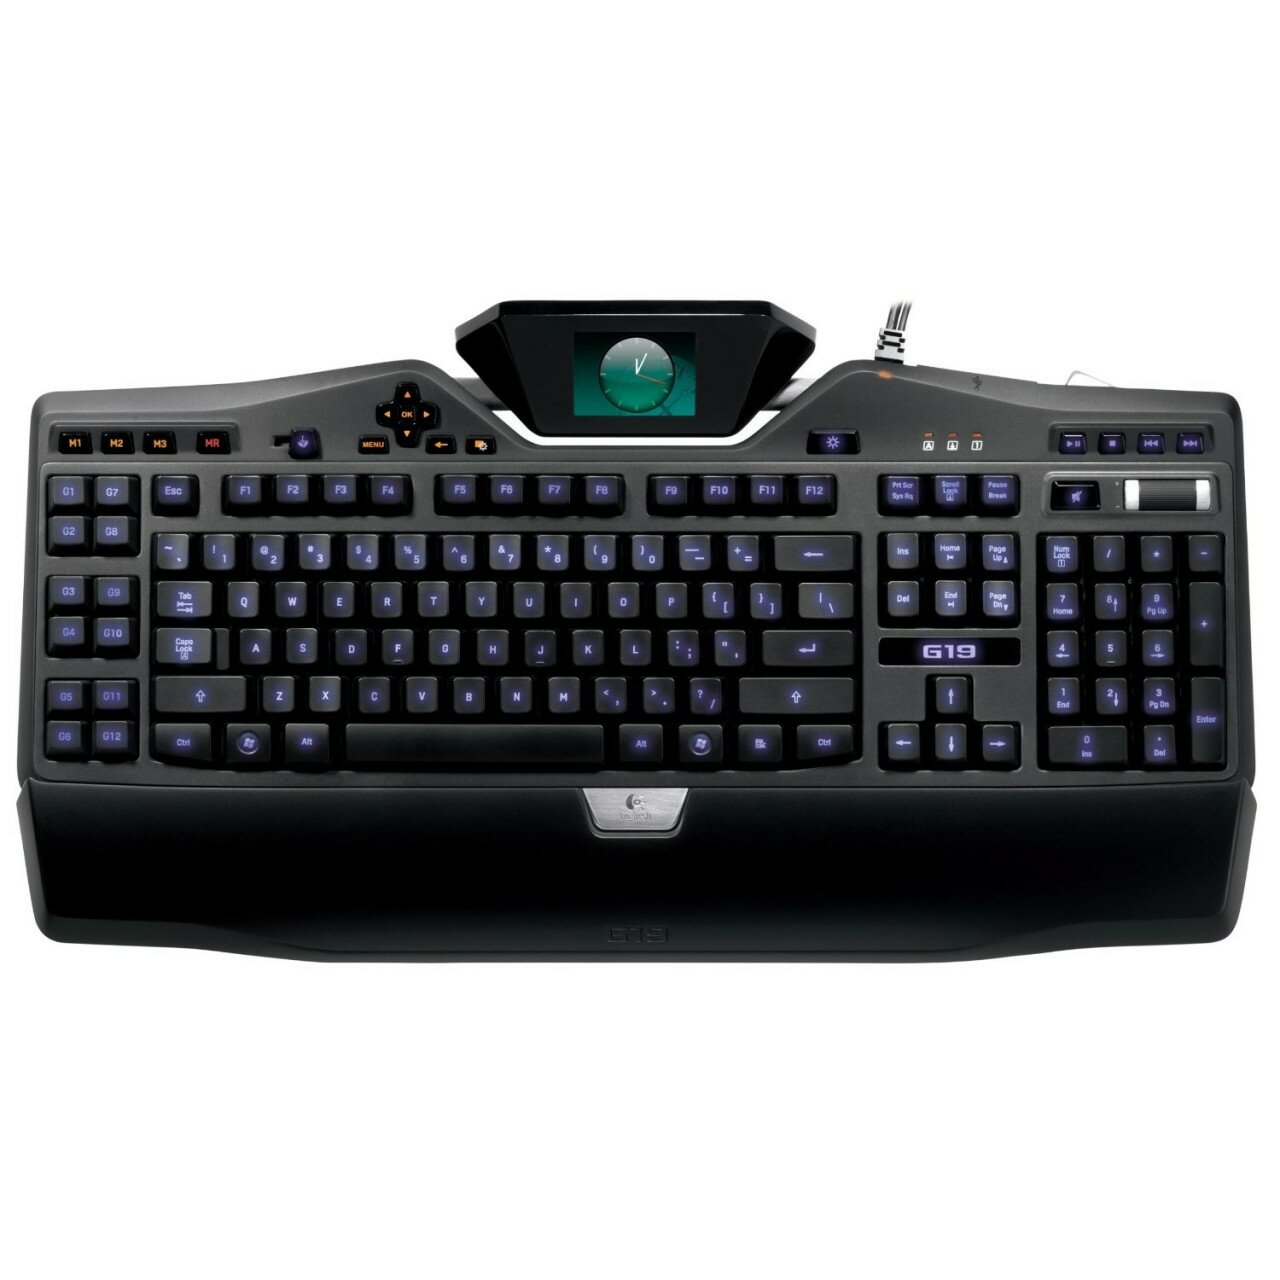 Logitech G19 Gaming Keyboard with Color Display hydshop.in